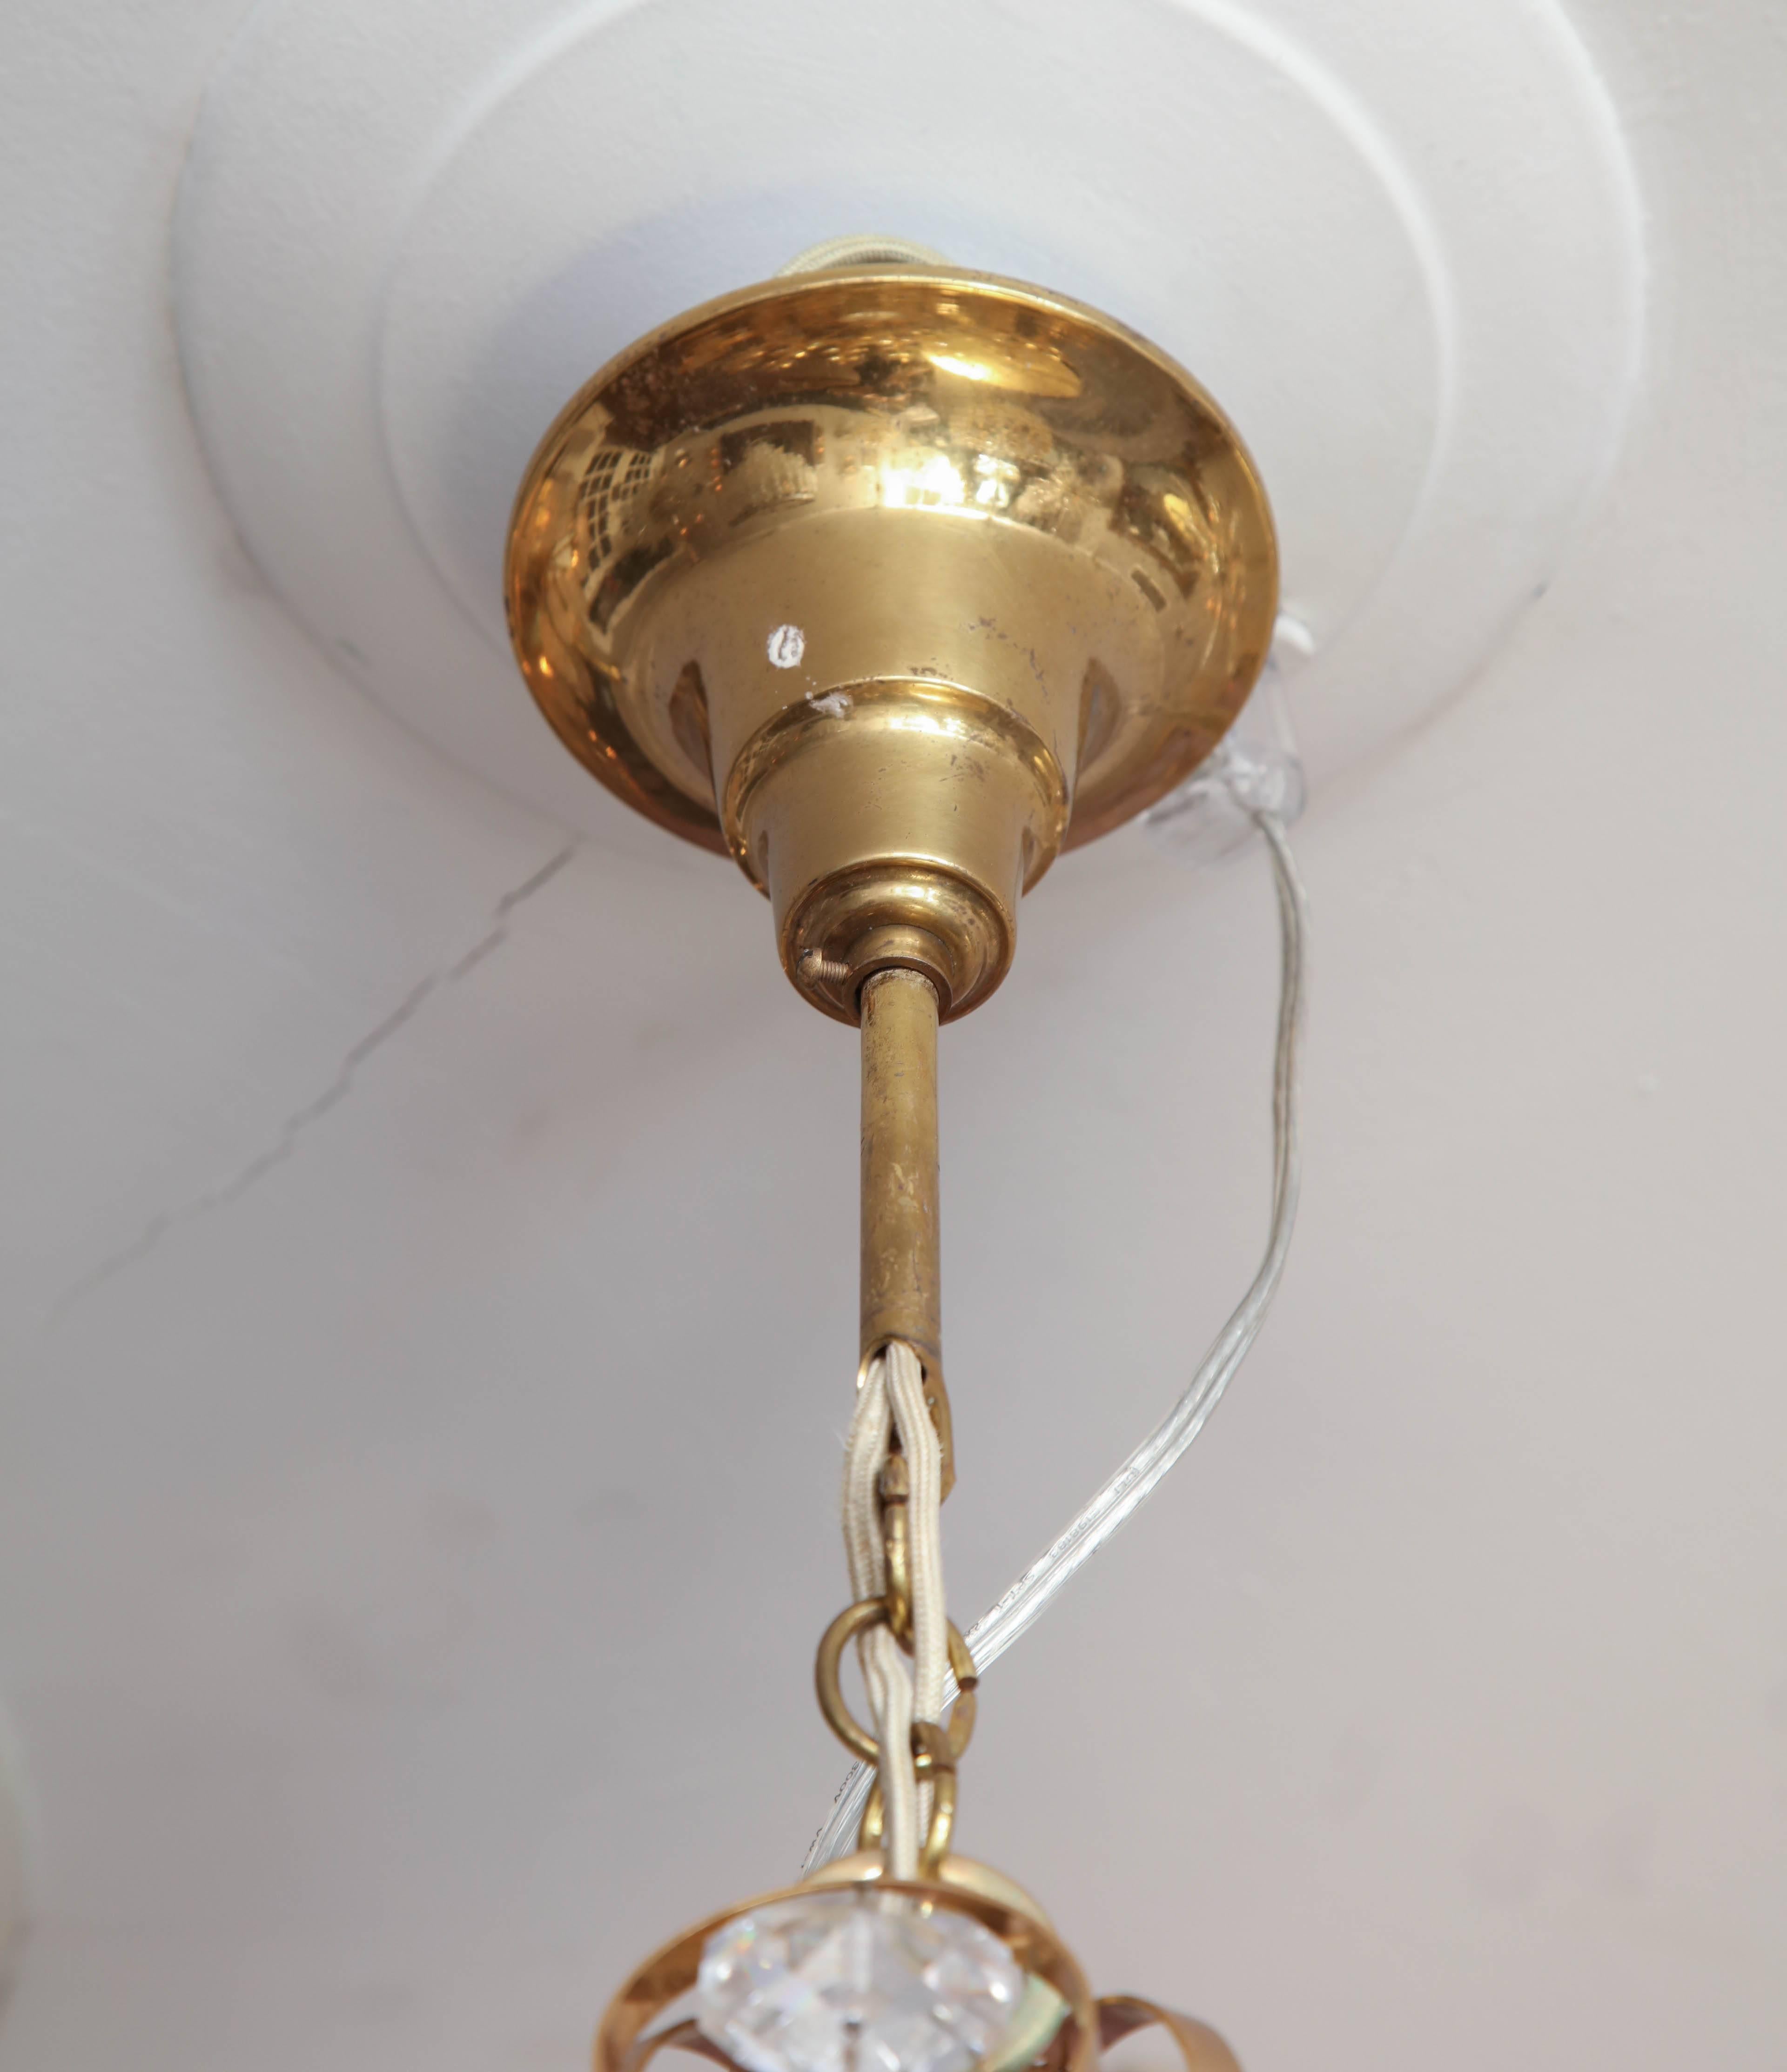 Glamorous Petite Vintage Palwa Chandelier In Excellent Condition For Sale In New York, NY